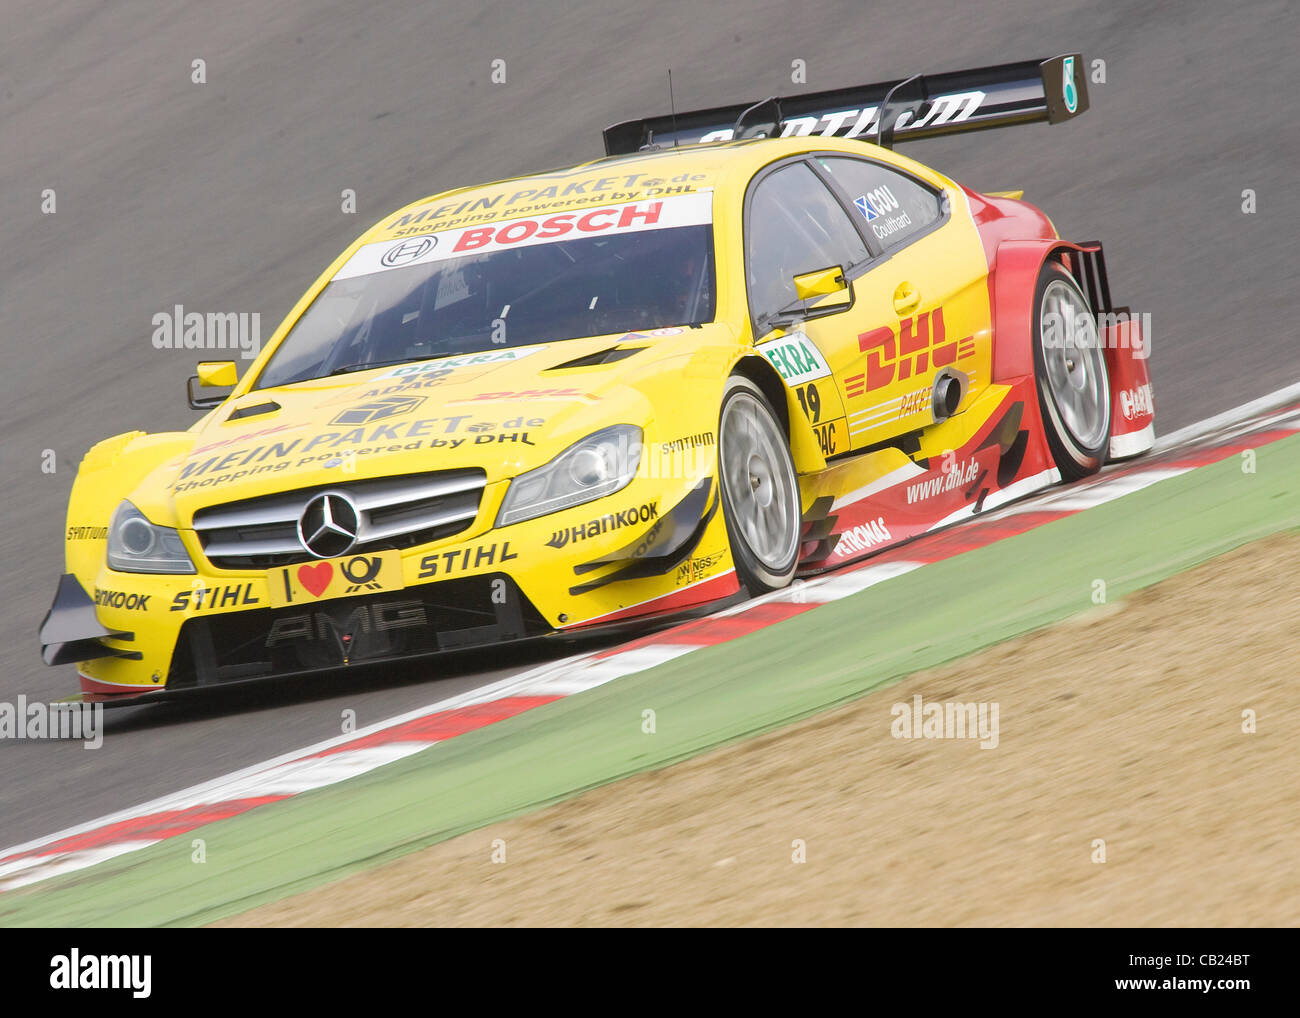 19.05.2012 Brands Hatch, David Coulthard driving the DHL Paket Mercedes C-Coupe in action during Saturday's Qualifying in the 2012 DTM Championship, Kent, England Stock Photo